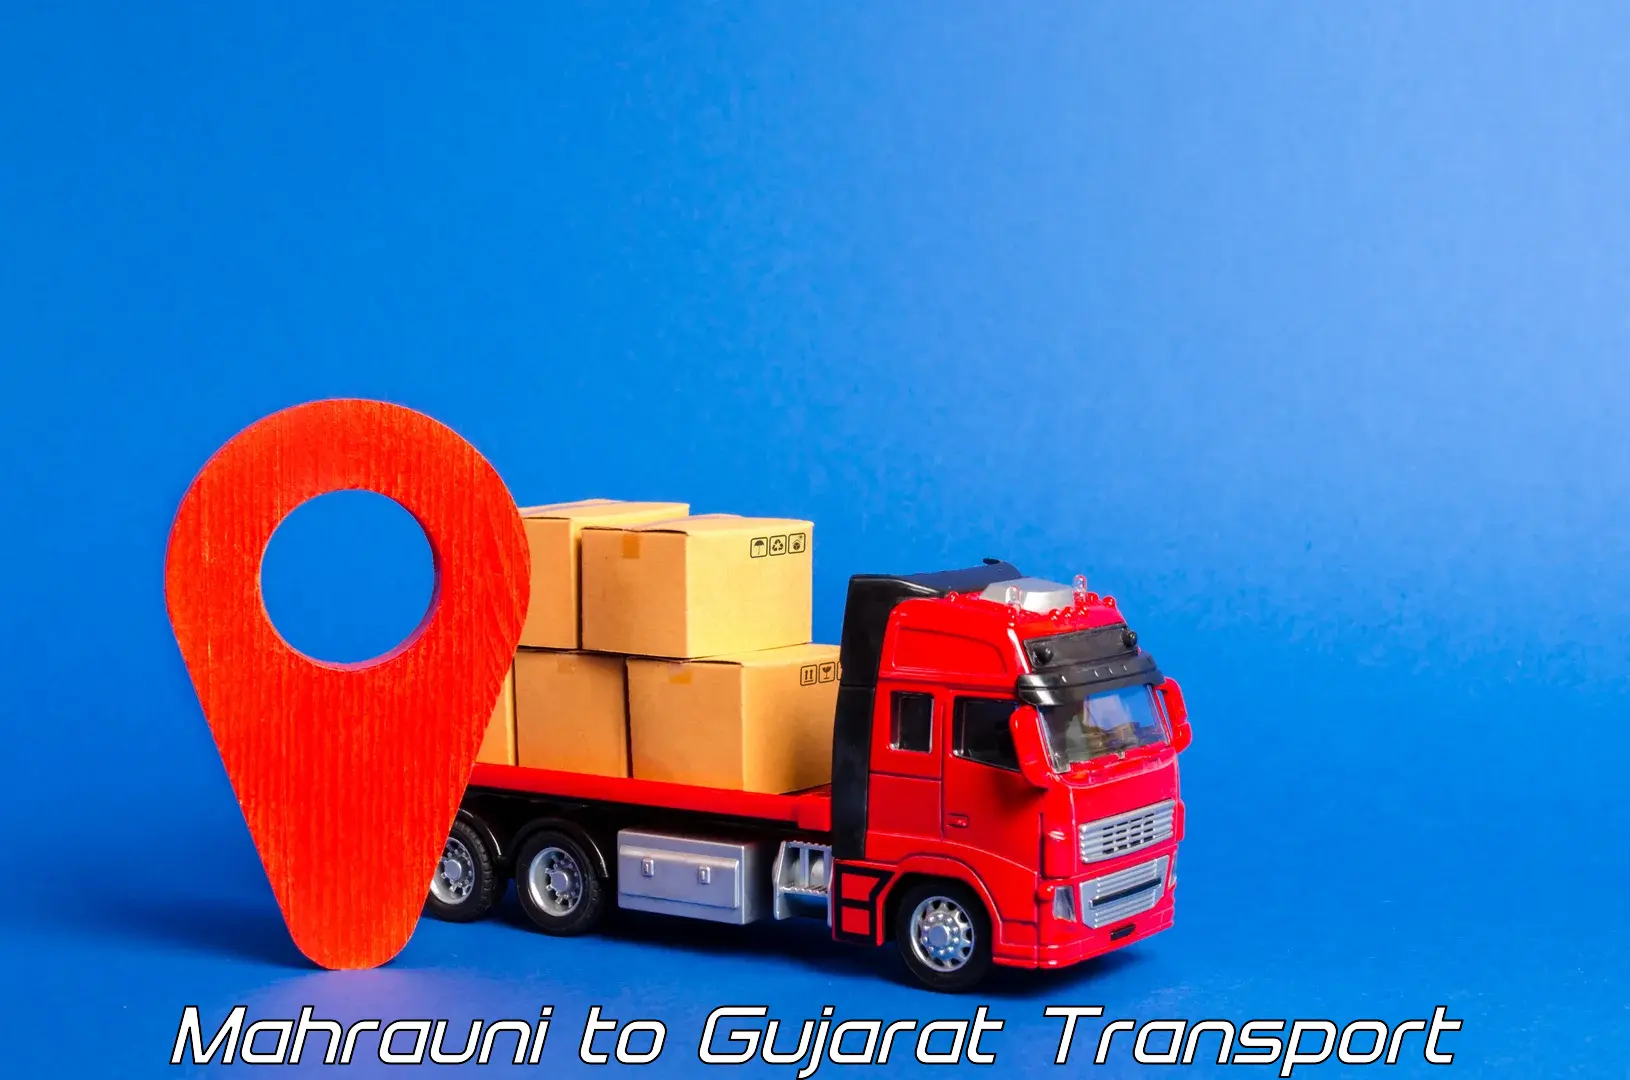 Road transport online services Mahrauni to Veraval